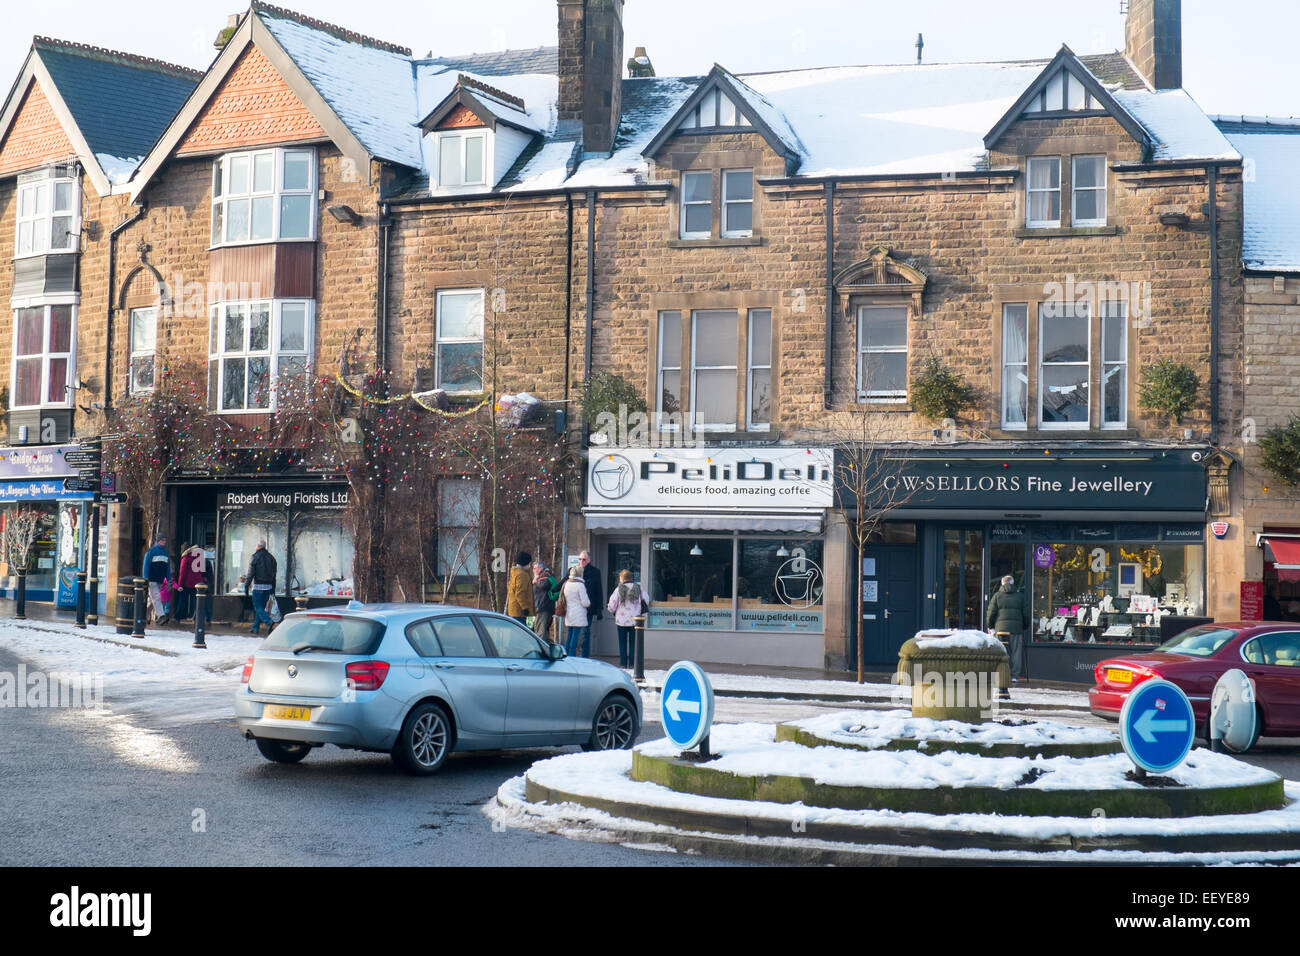 Matlock town centre on a snowy January day, Derbyshire,England,UK Stock Photo